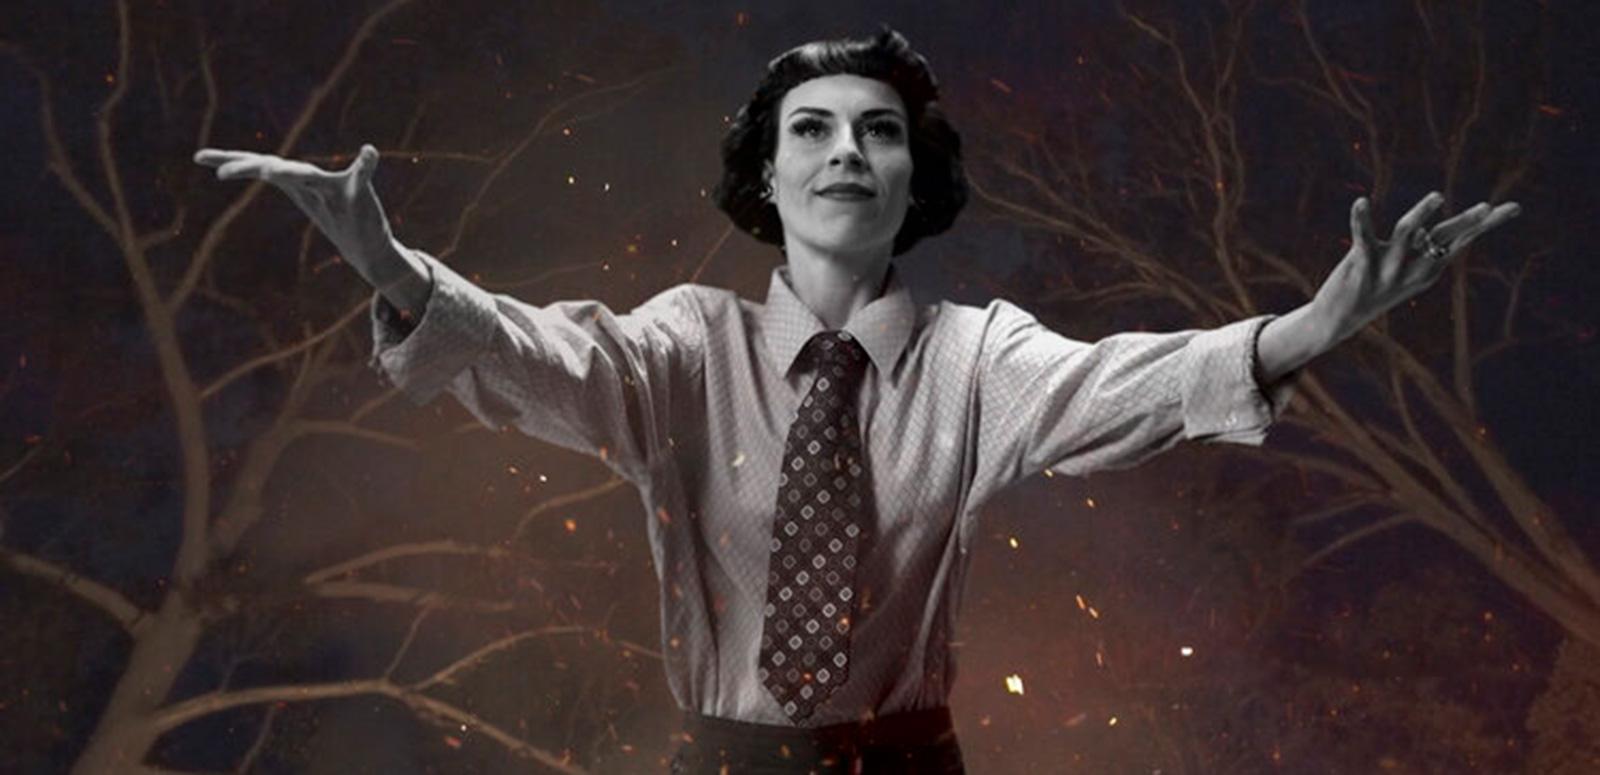 A young woman with short dark hair wearing a business shirt and tie with her arms stretched out wide in front of her. Behind her in the night sky there are tree branches, stars and flickering flames